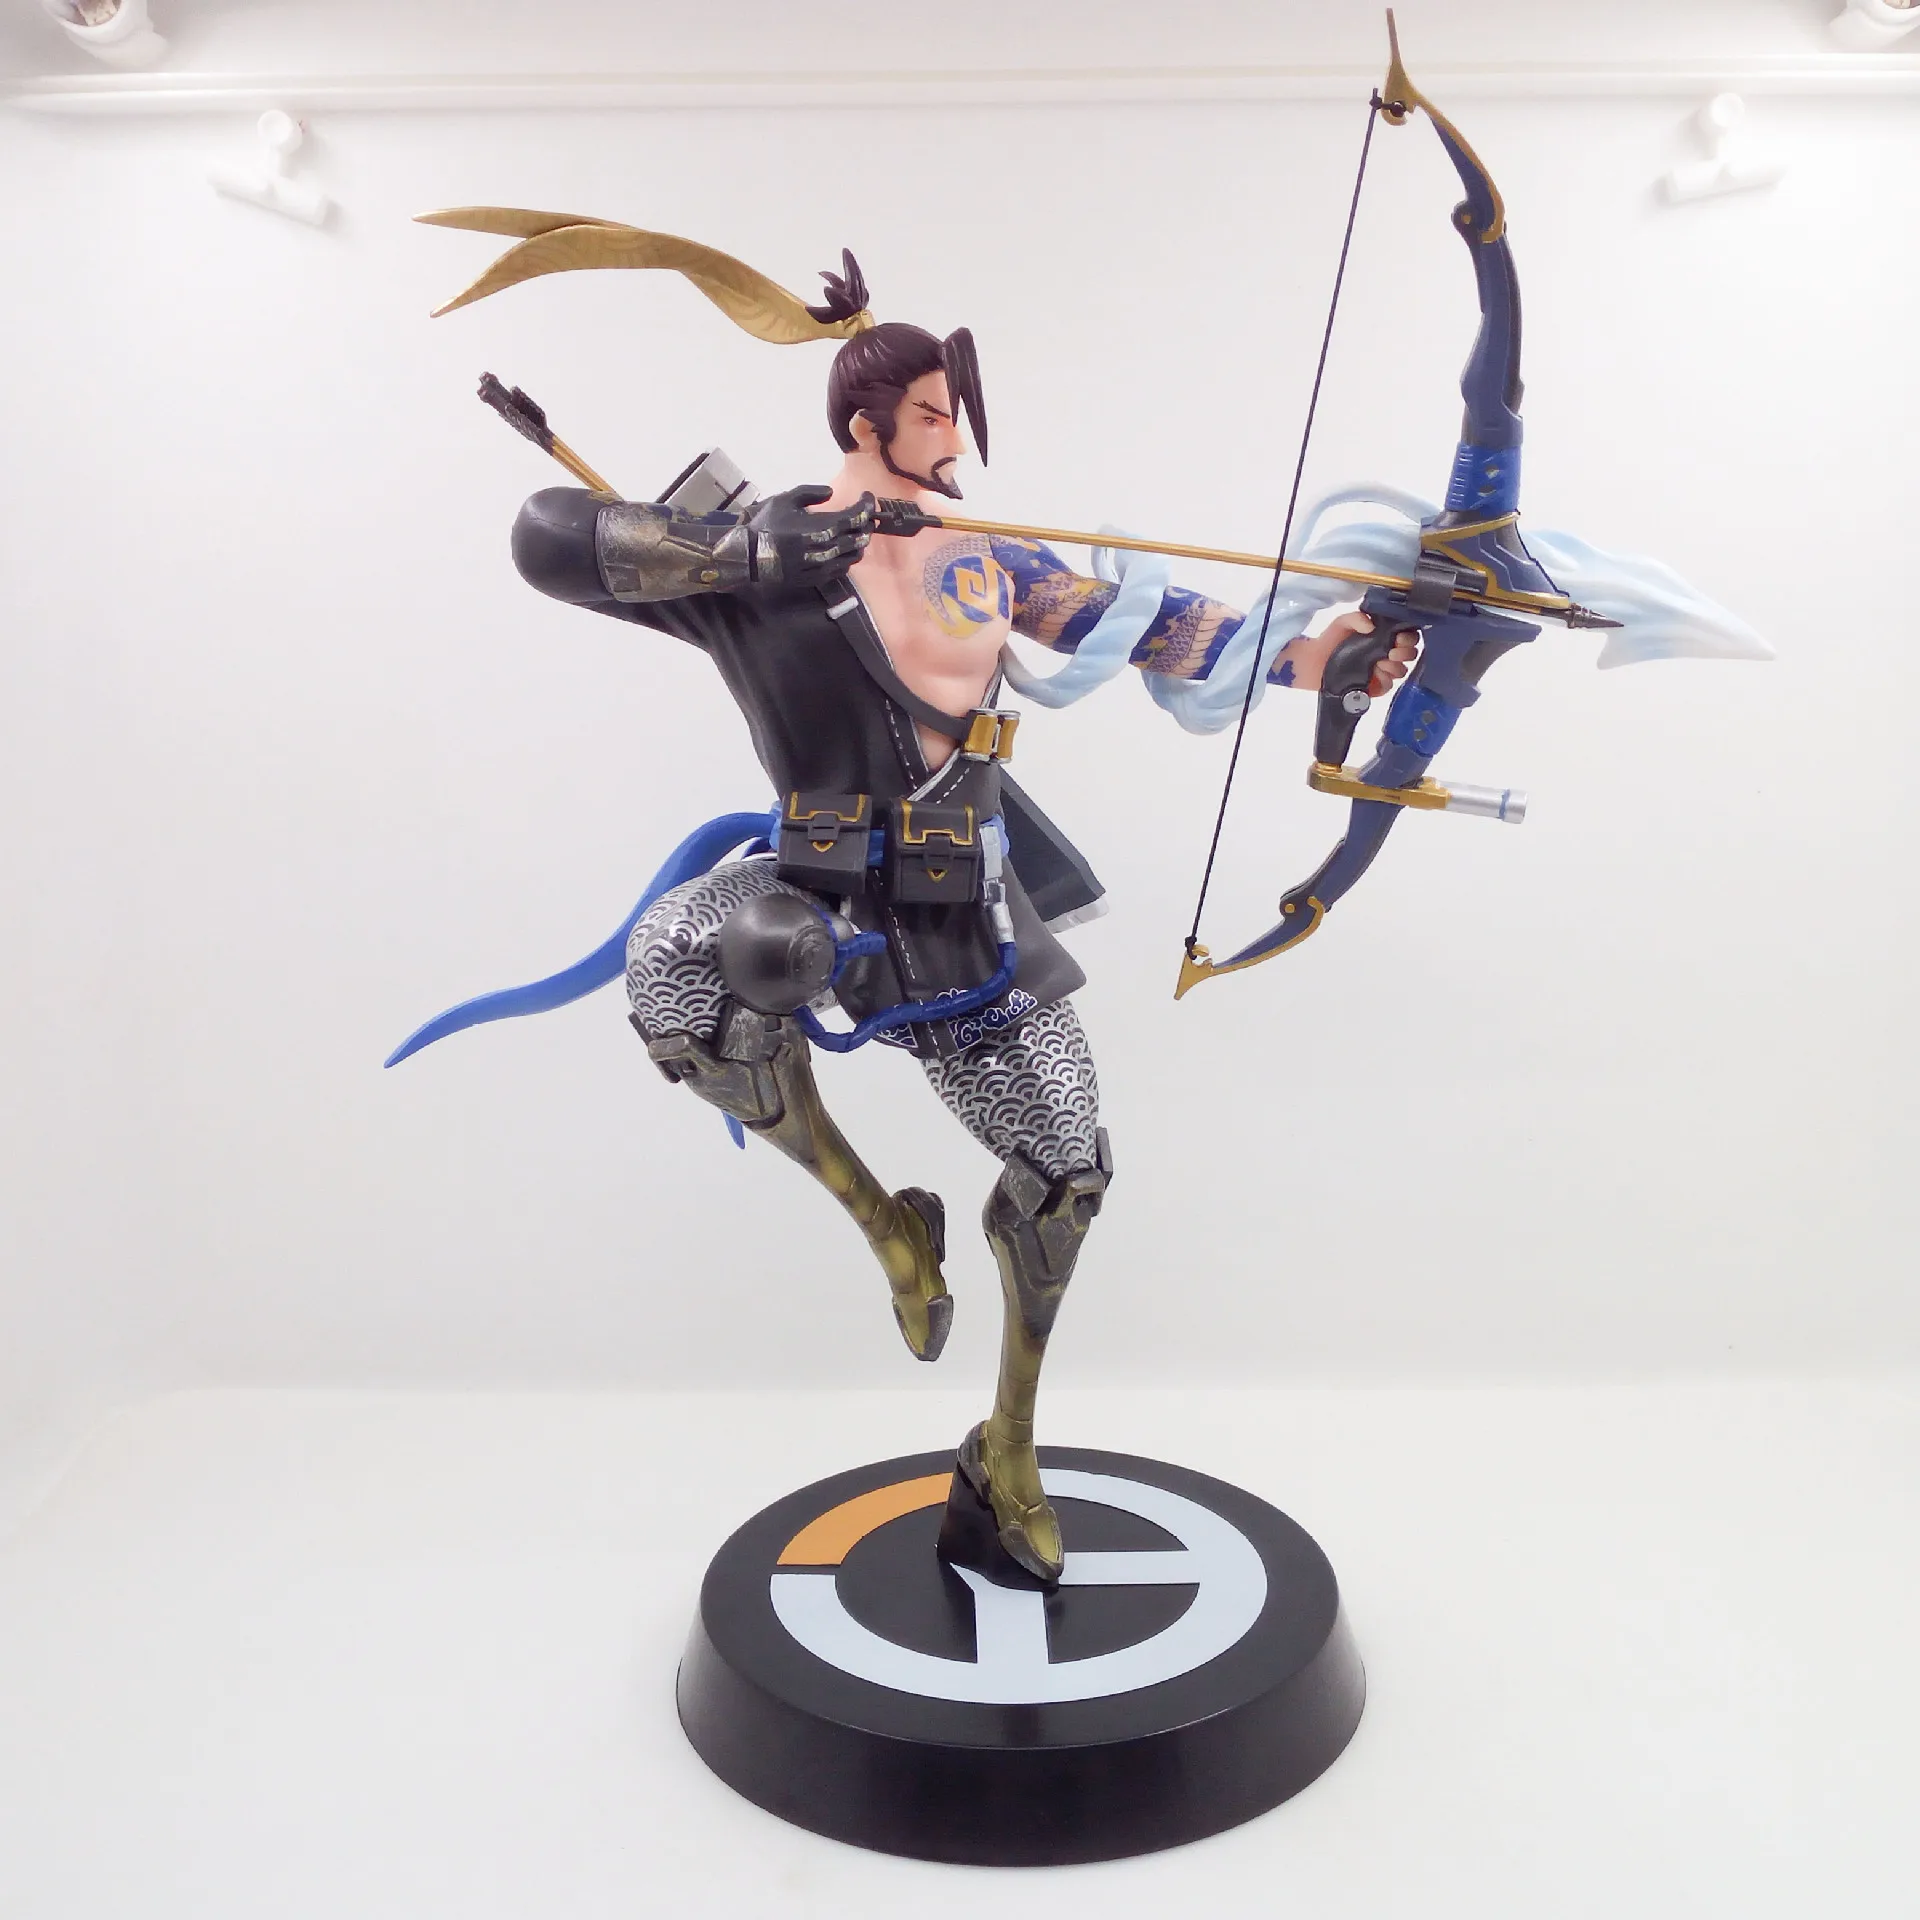 

Overwatch OW Action Figure Shimada Hanzo Archer Doll Game Figures GK PVC Children Toys Friends Gifts Desktop Collectibles